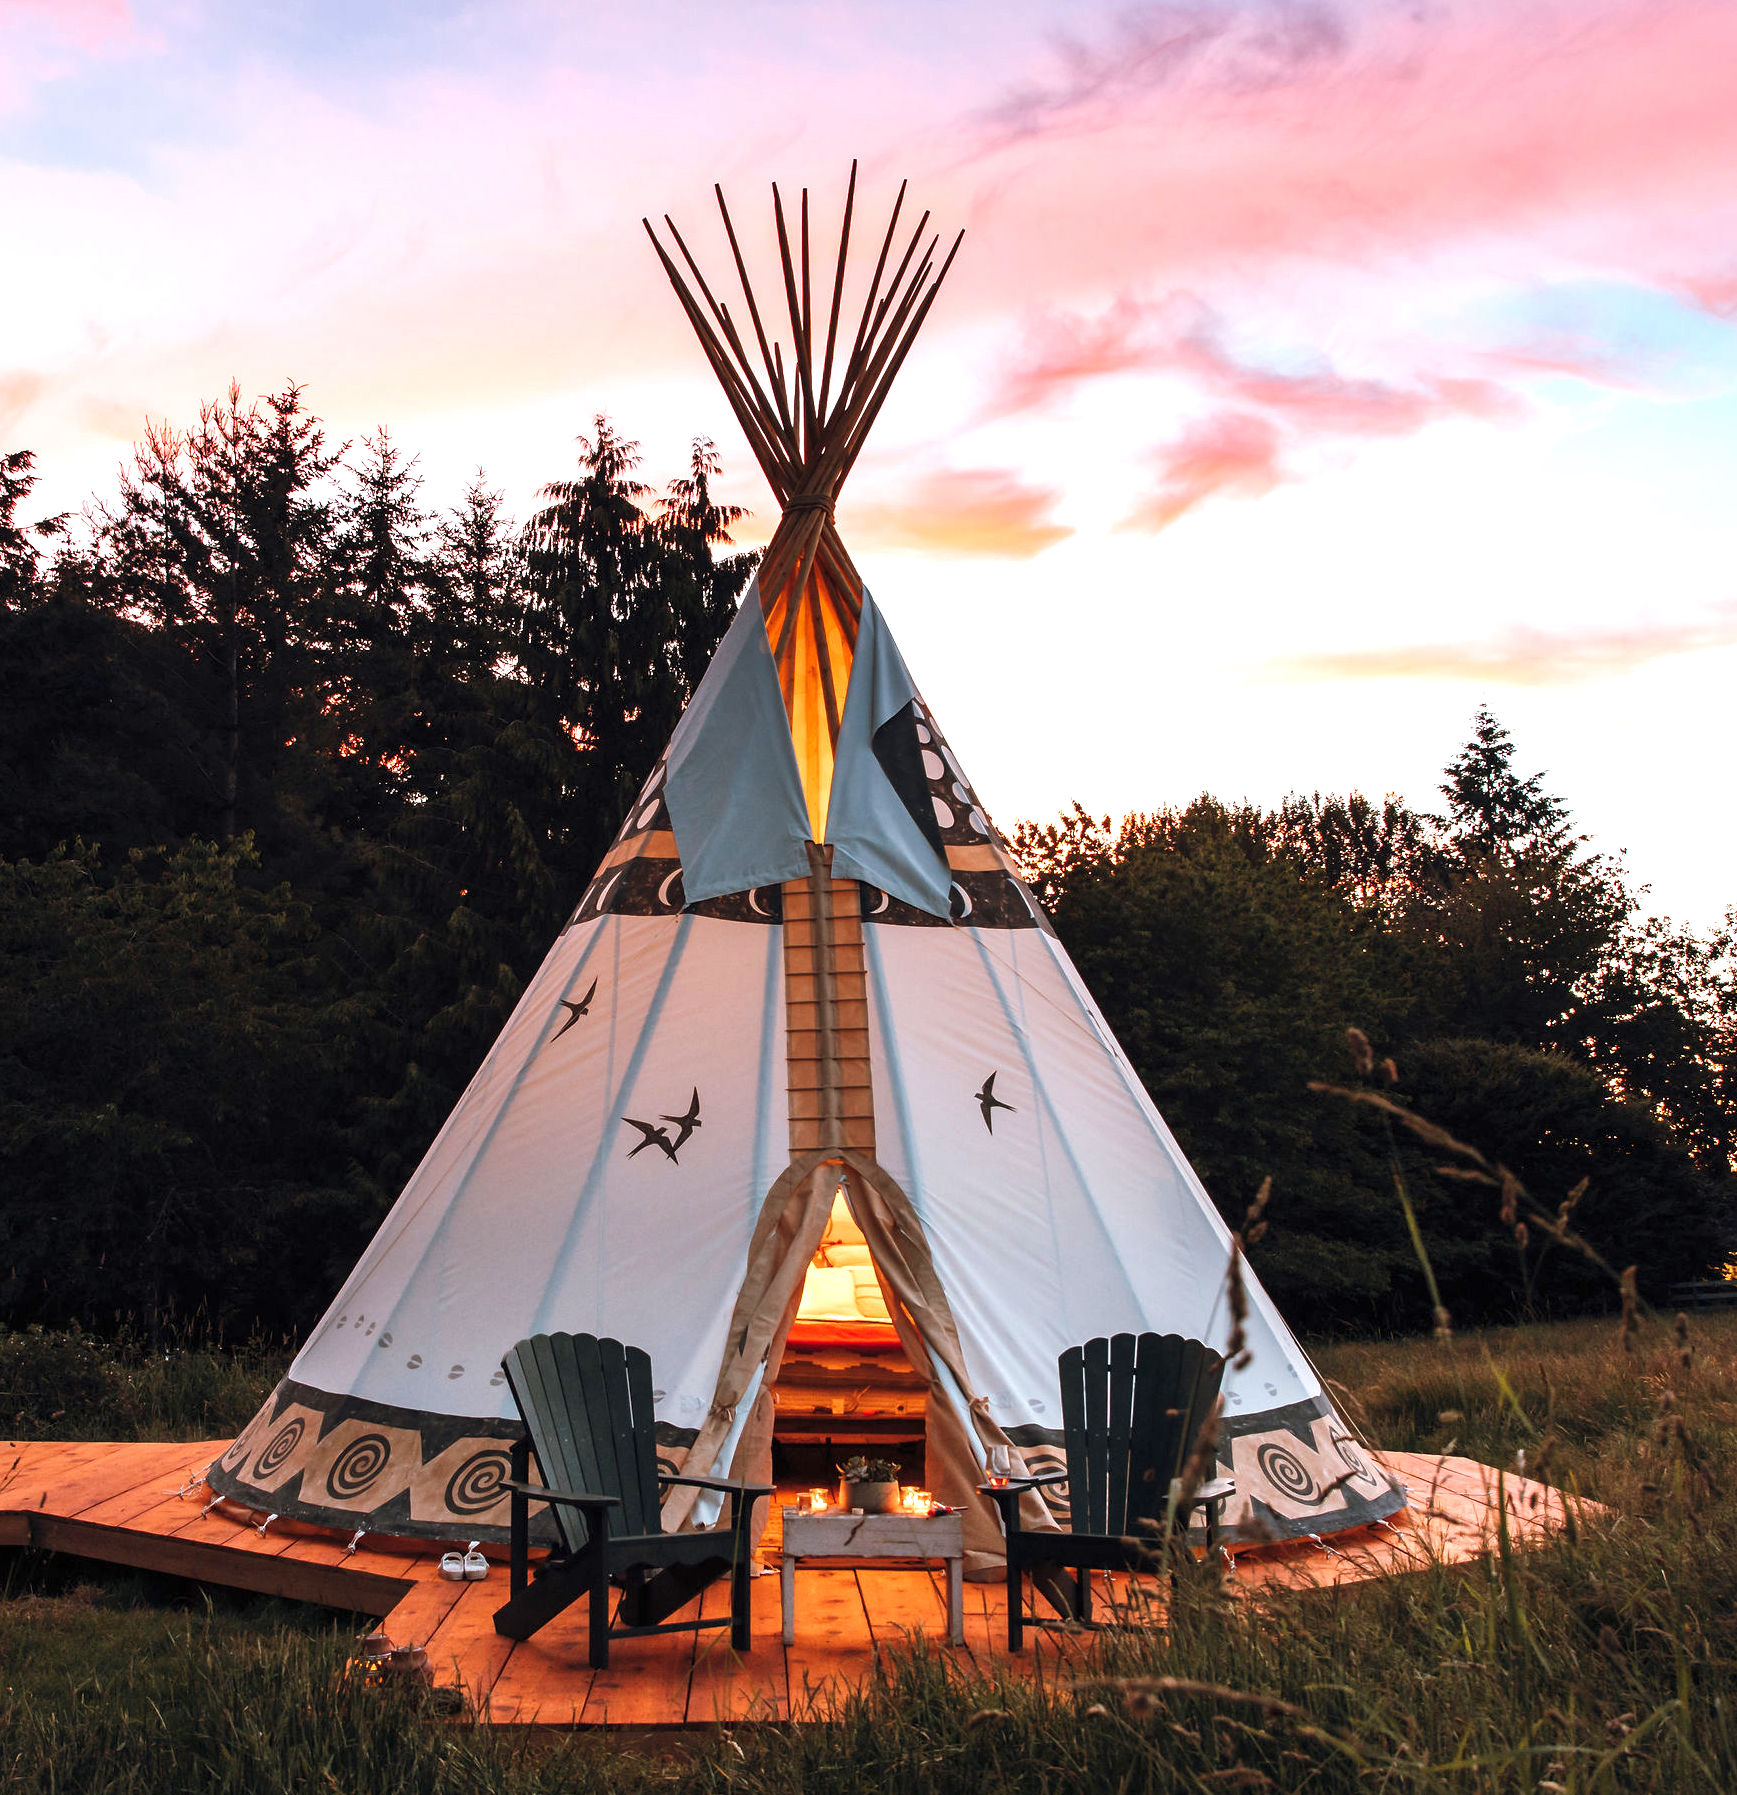 Nomadics Tipi Makers | Making with respect for authenticity since 1970